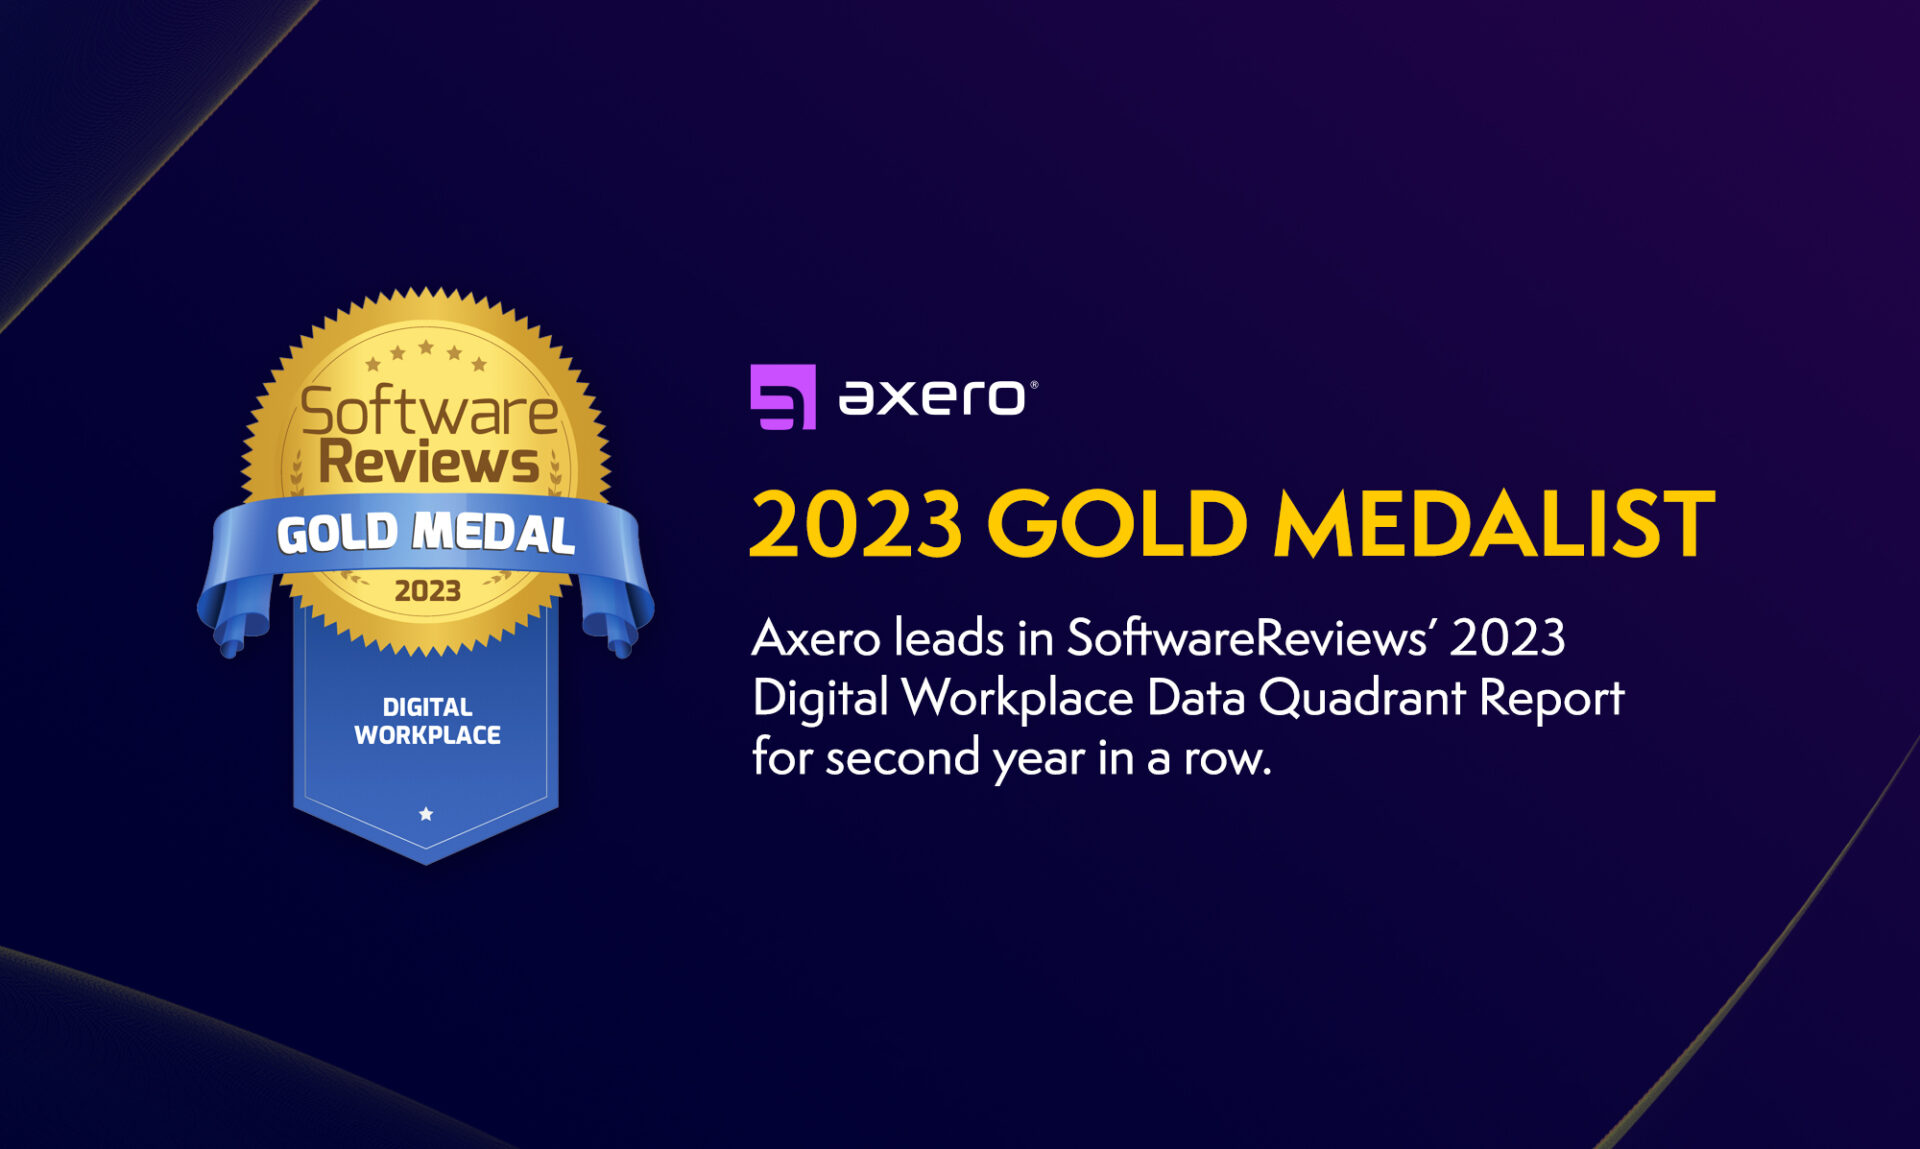 Axero Leads in Software Reviews’ 2023 Digital Workplace Data Quadrant Report for Second Year